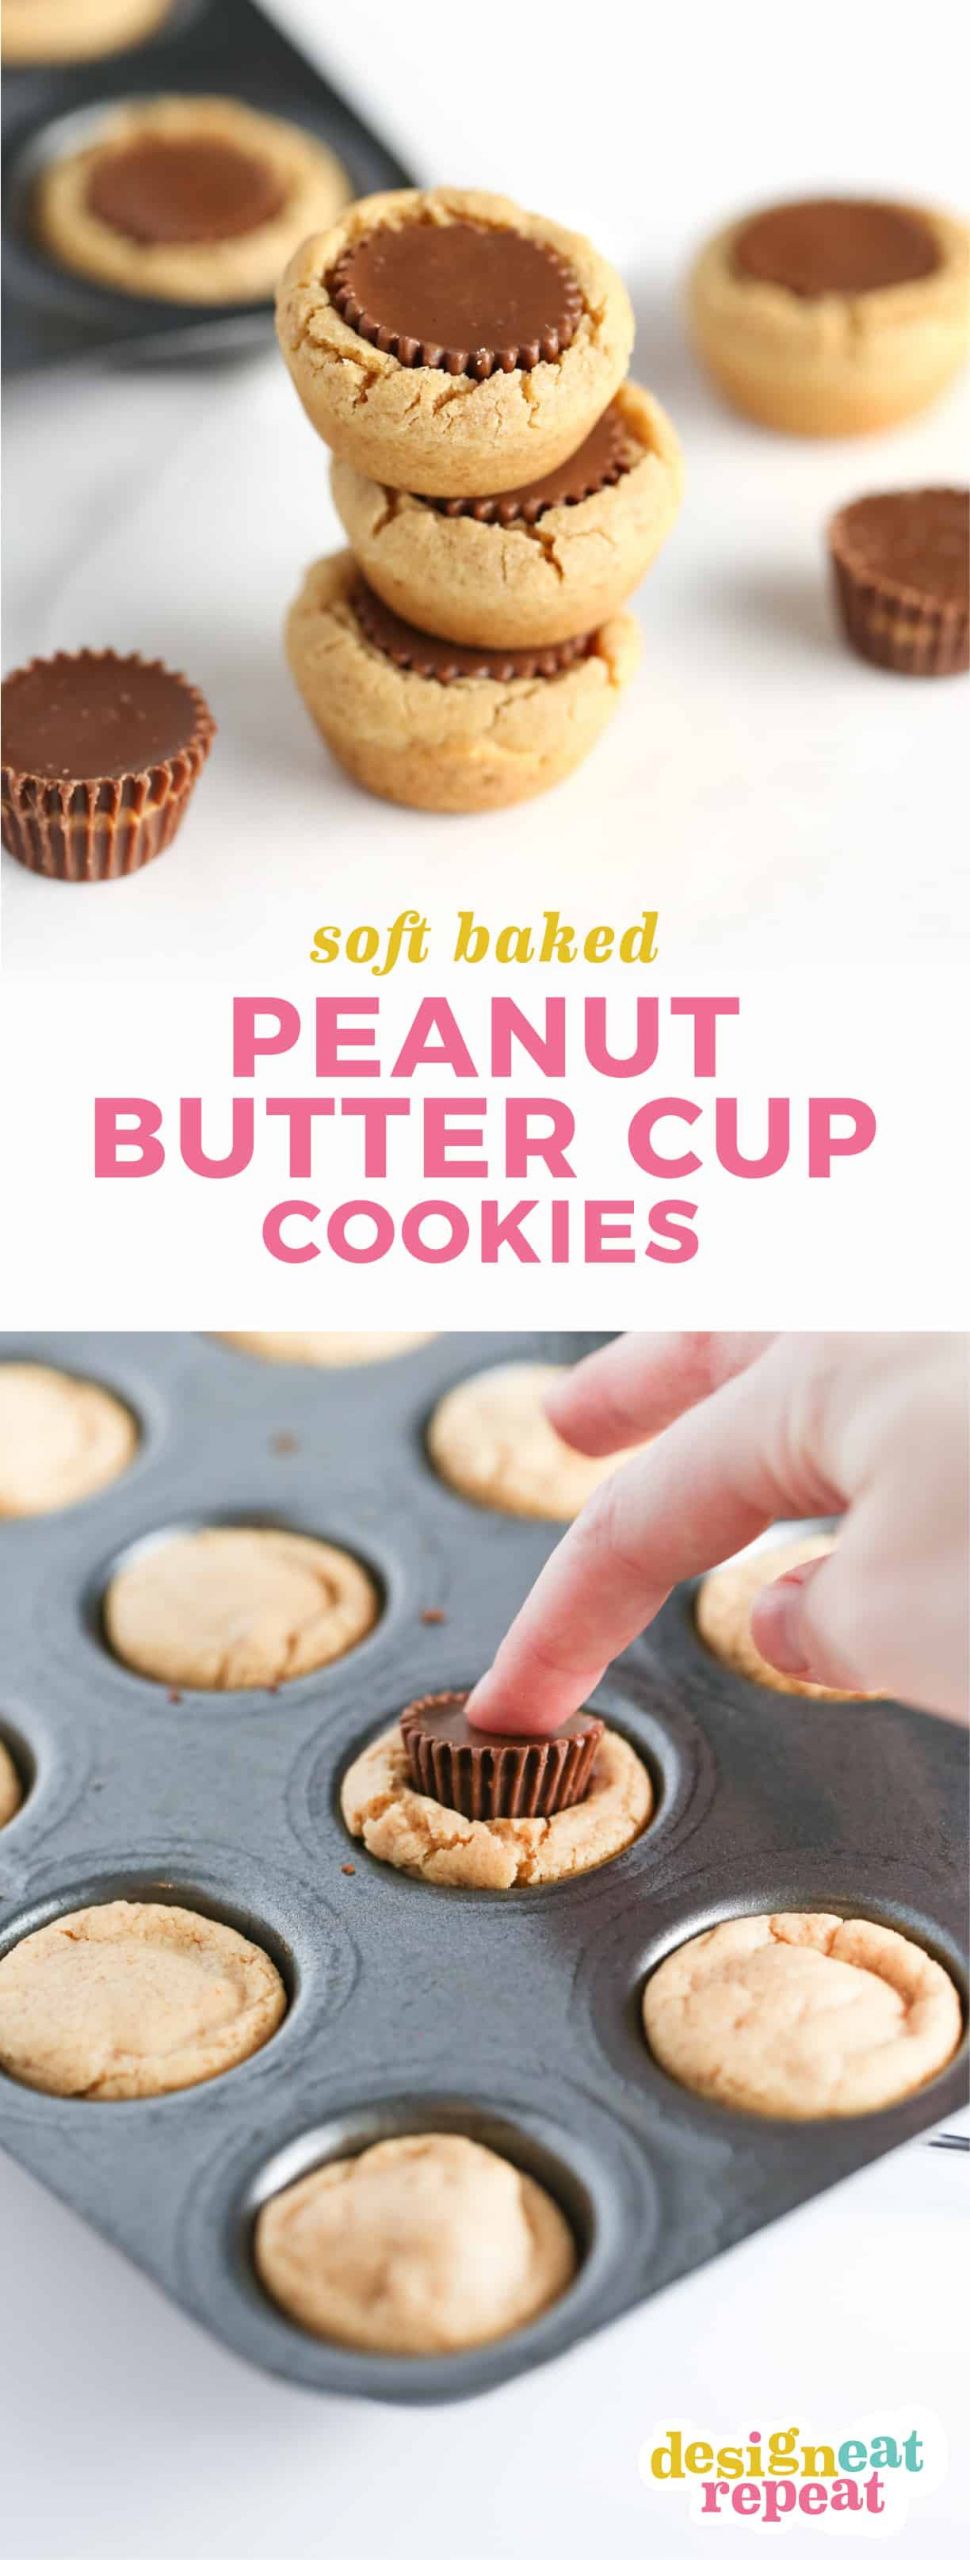 Peanut Butter Cookies With Reeses Cup
 Reeses Peanut Butter Cup Cookies